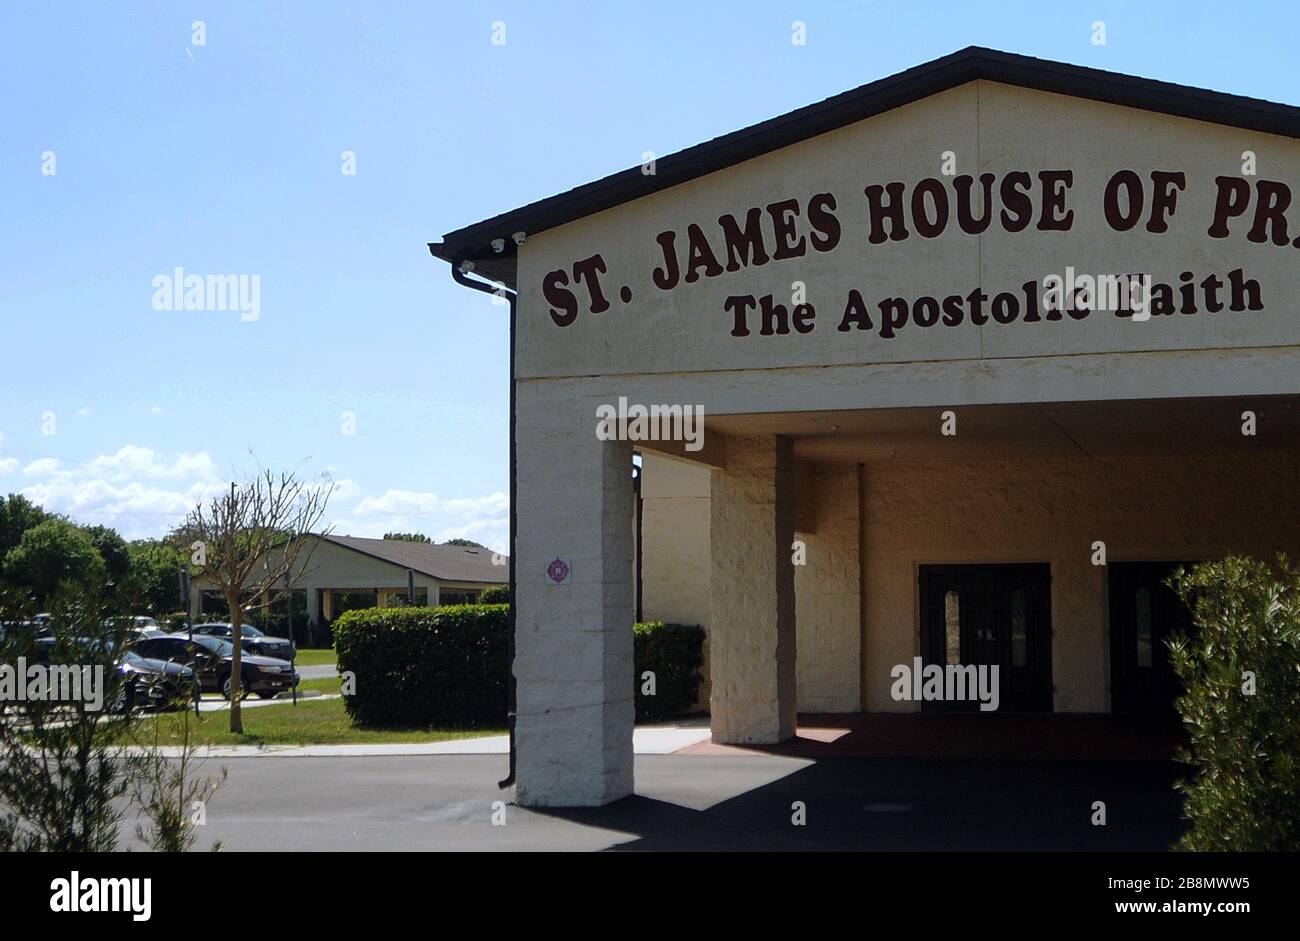 March 22, 2020 - Sanford, Florida, United States - The St. James House of Prayer of the Apostolic Faith Church holds Sunday services in an open air building behind the church on March 22, 2020 in Sanford, Florida in an effort to curb the spread of COVID-19. (Paul Hennessy/Alamy) Stock Photo